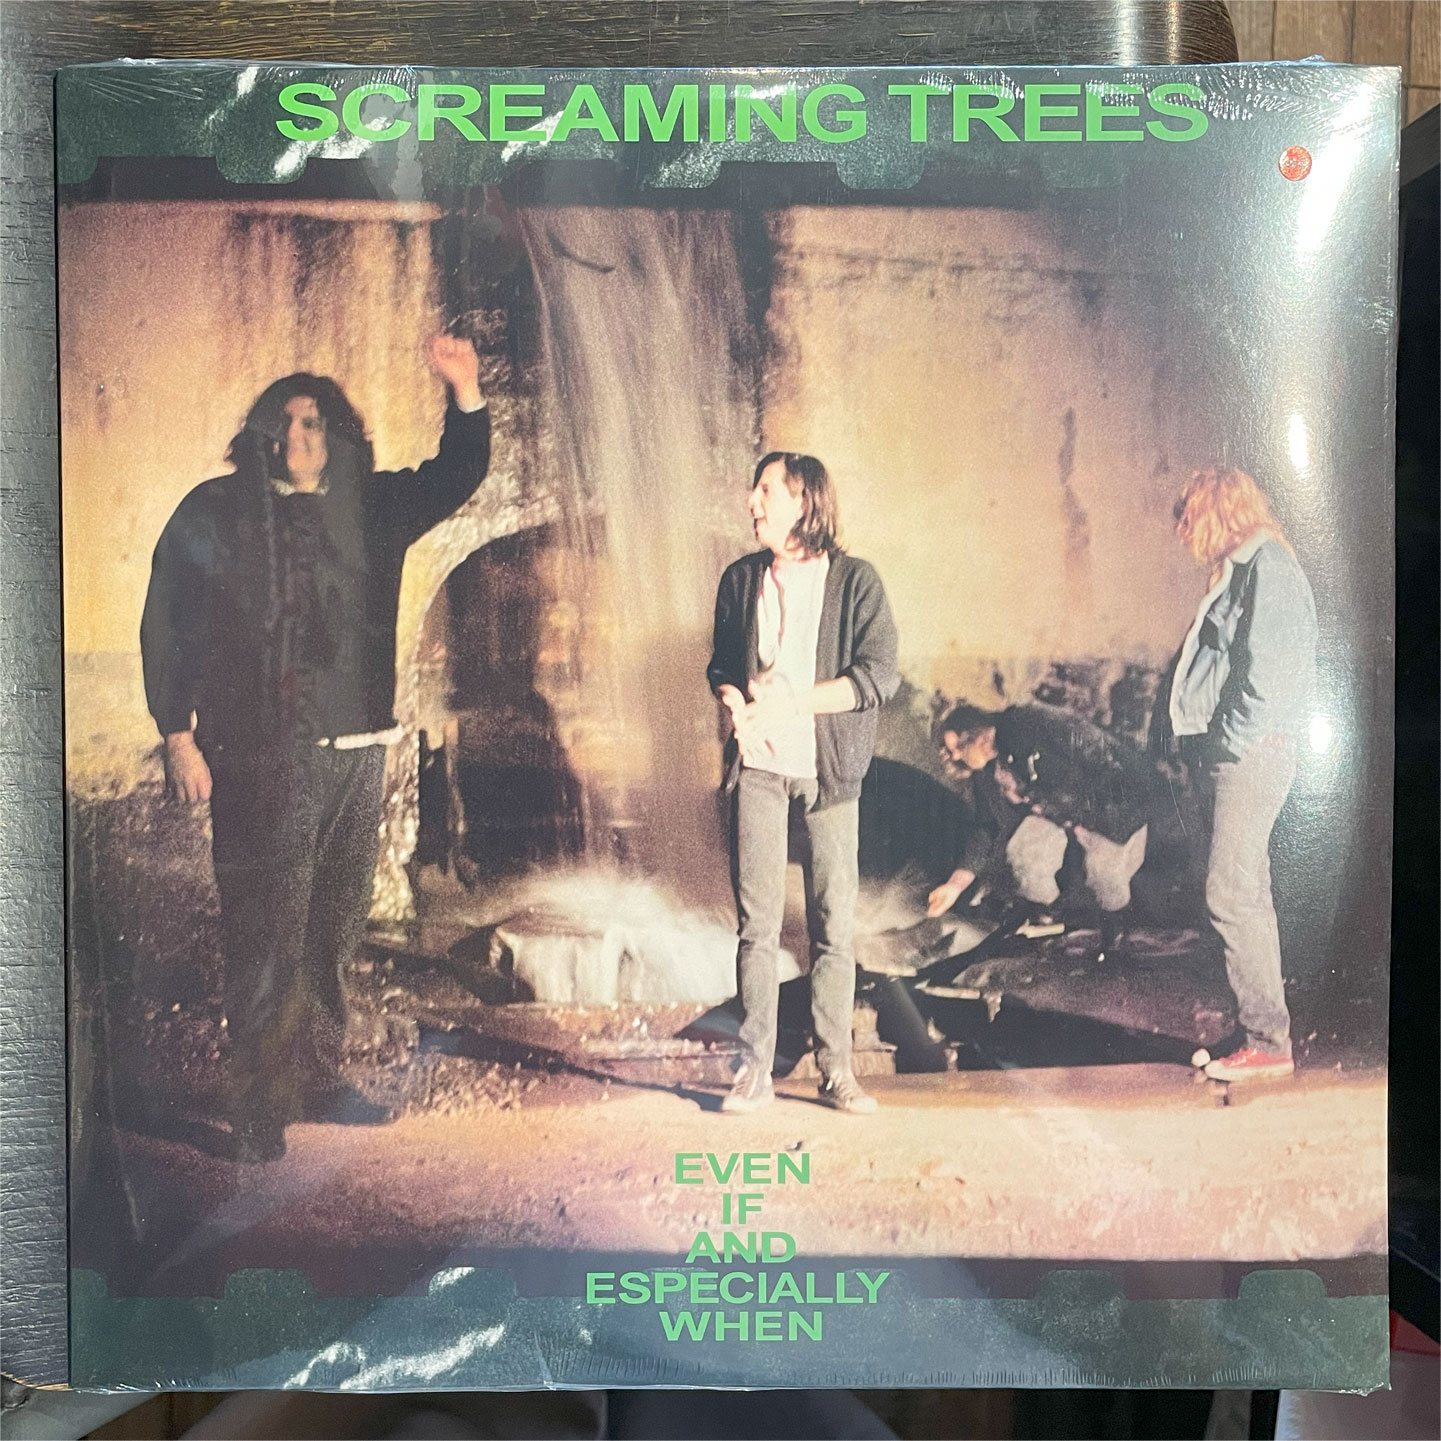 Screaming Trees 12" LP Even If And Especially When